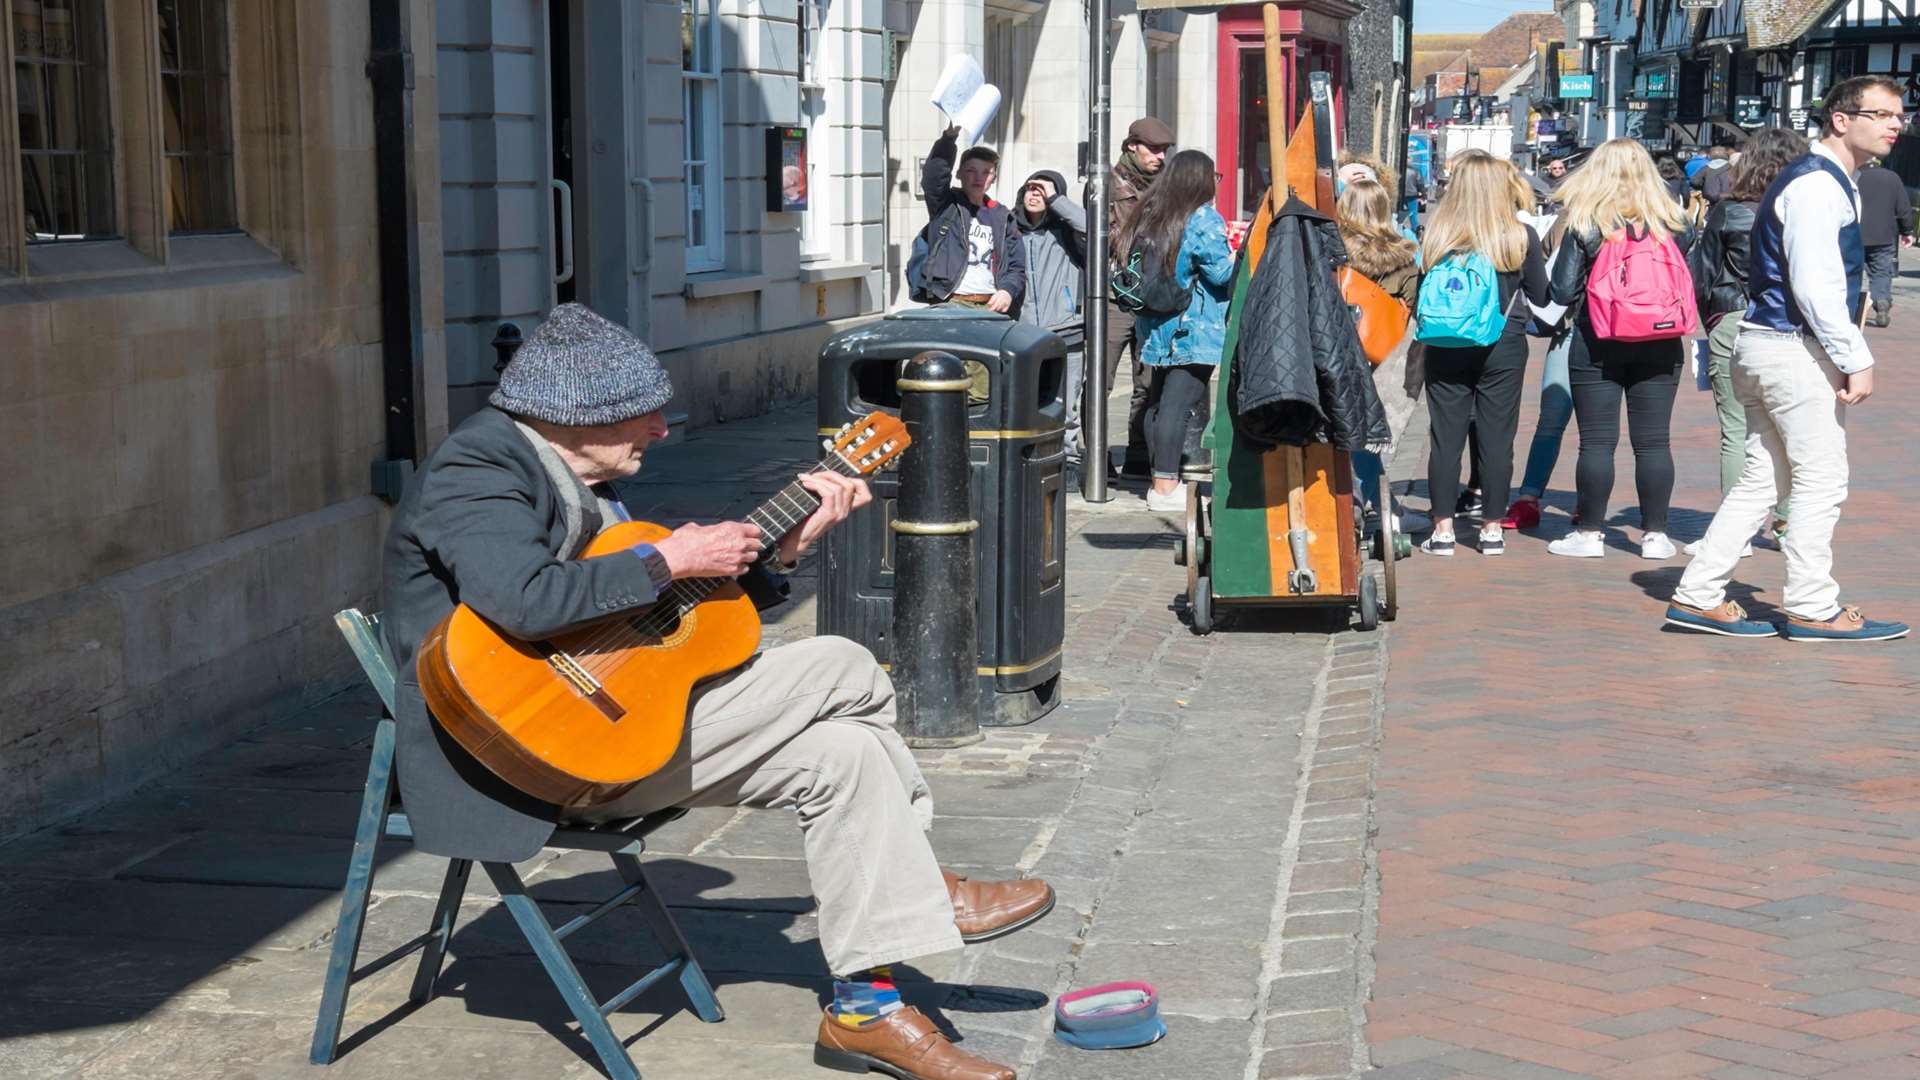 Jean-Philippe madjar busking outside the Abode Hotel in Canterbury.